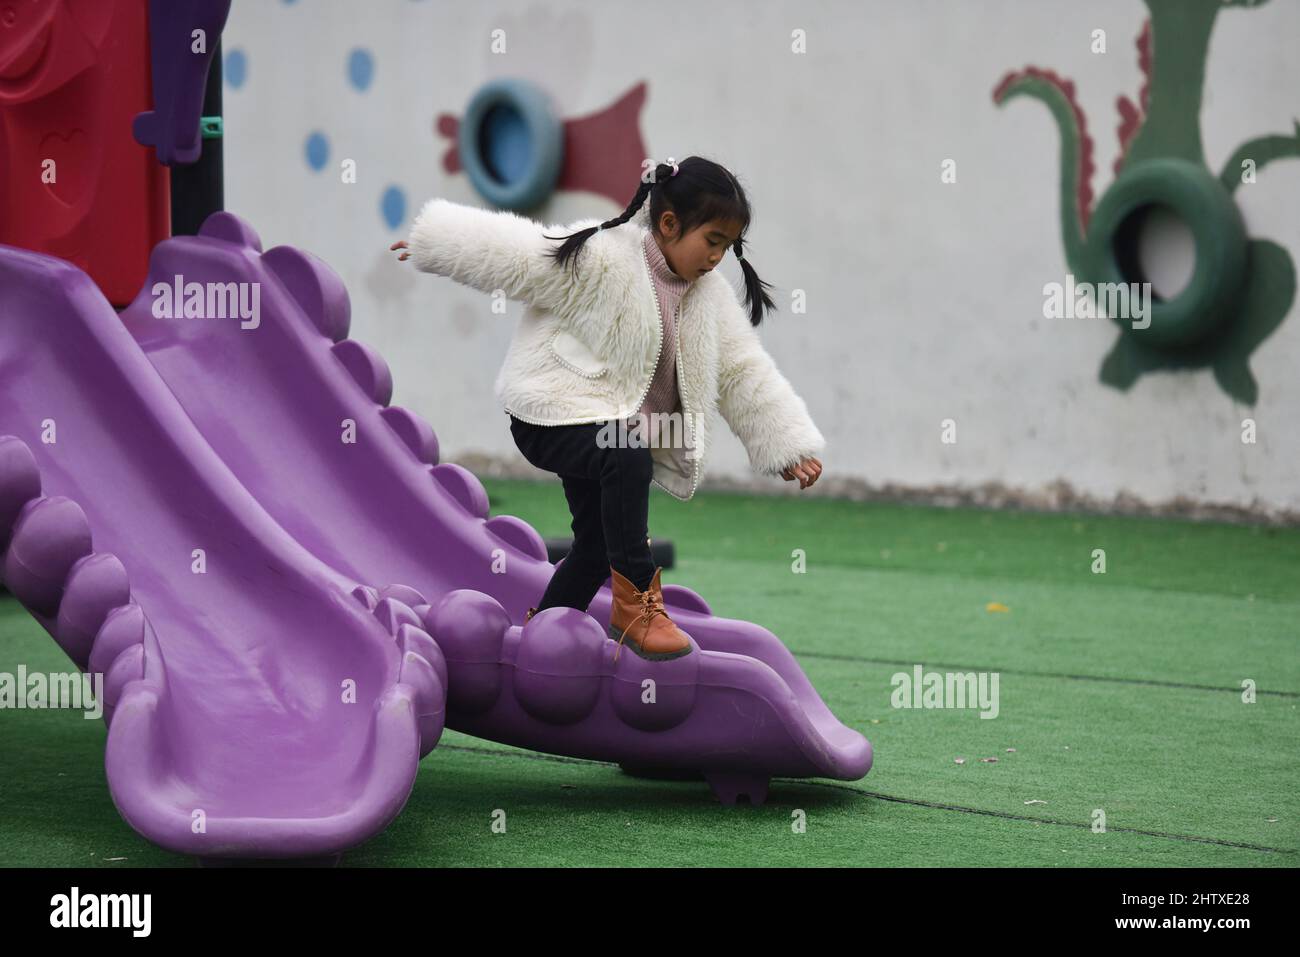 A little girl is playing on a slide in a kindergarten.The National Bureau of Statistics of China released the Statistical Communique on the 2021 National Economic and Social Development. According to the communique, China's population at the end of 2021 was 1,412.6 million, an increase of 480,000 over the previous year, including 914.25 million permanent urban residents. There were 10.62 million births, with a birth rate of 7.52 per thousand. 10.14 million people died, with a mortality rate of 7.18 per thousand. The natural growth rate is 0.34%. Stock Photo